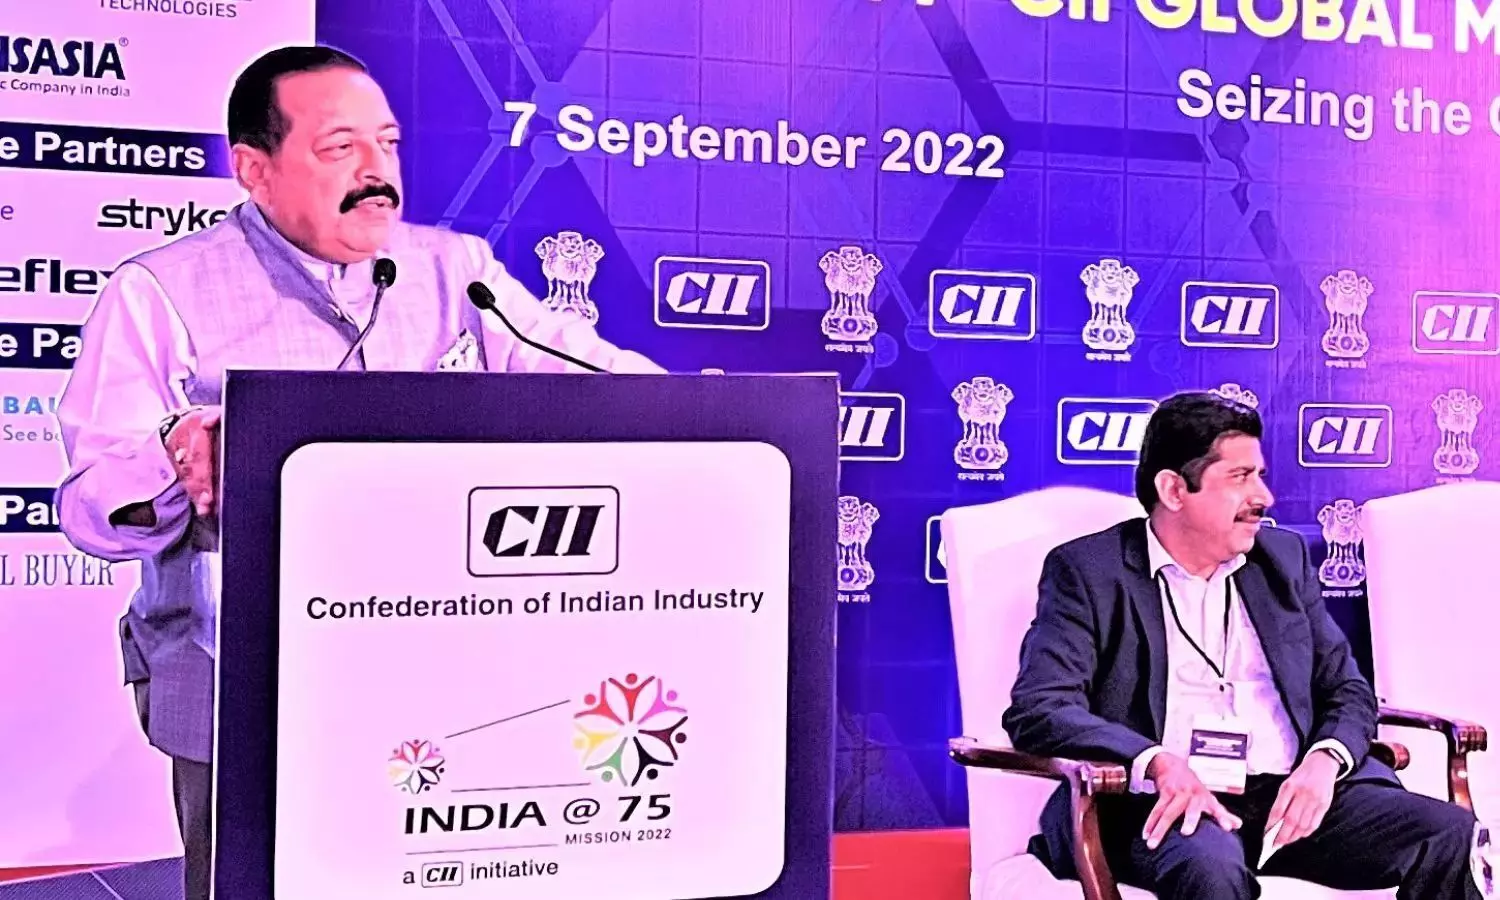 Indias healthcare sector expects to reach $50 billion by 2025: Union Minister Dr Jitendra